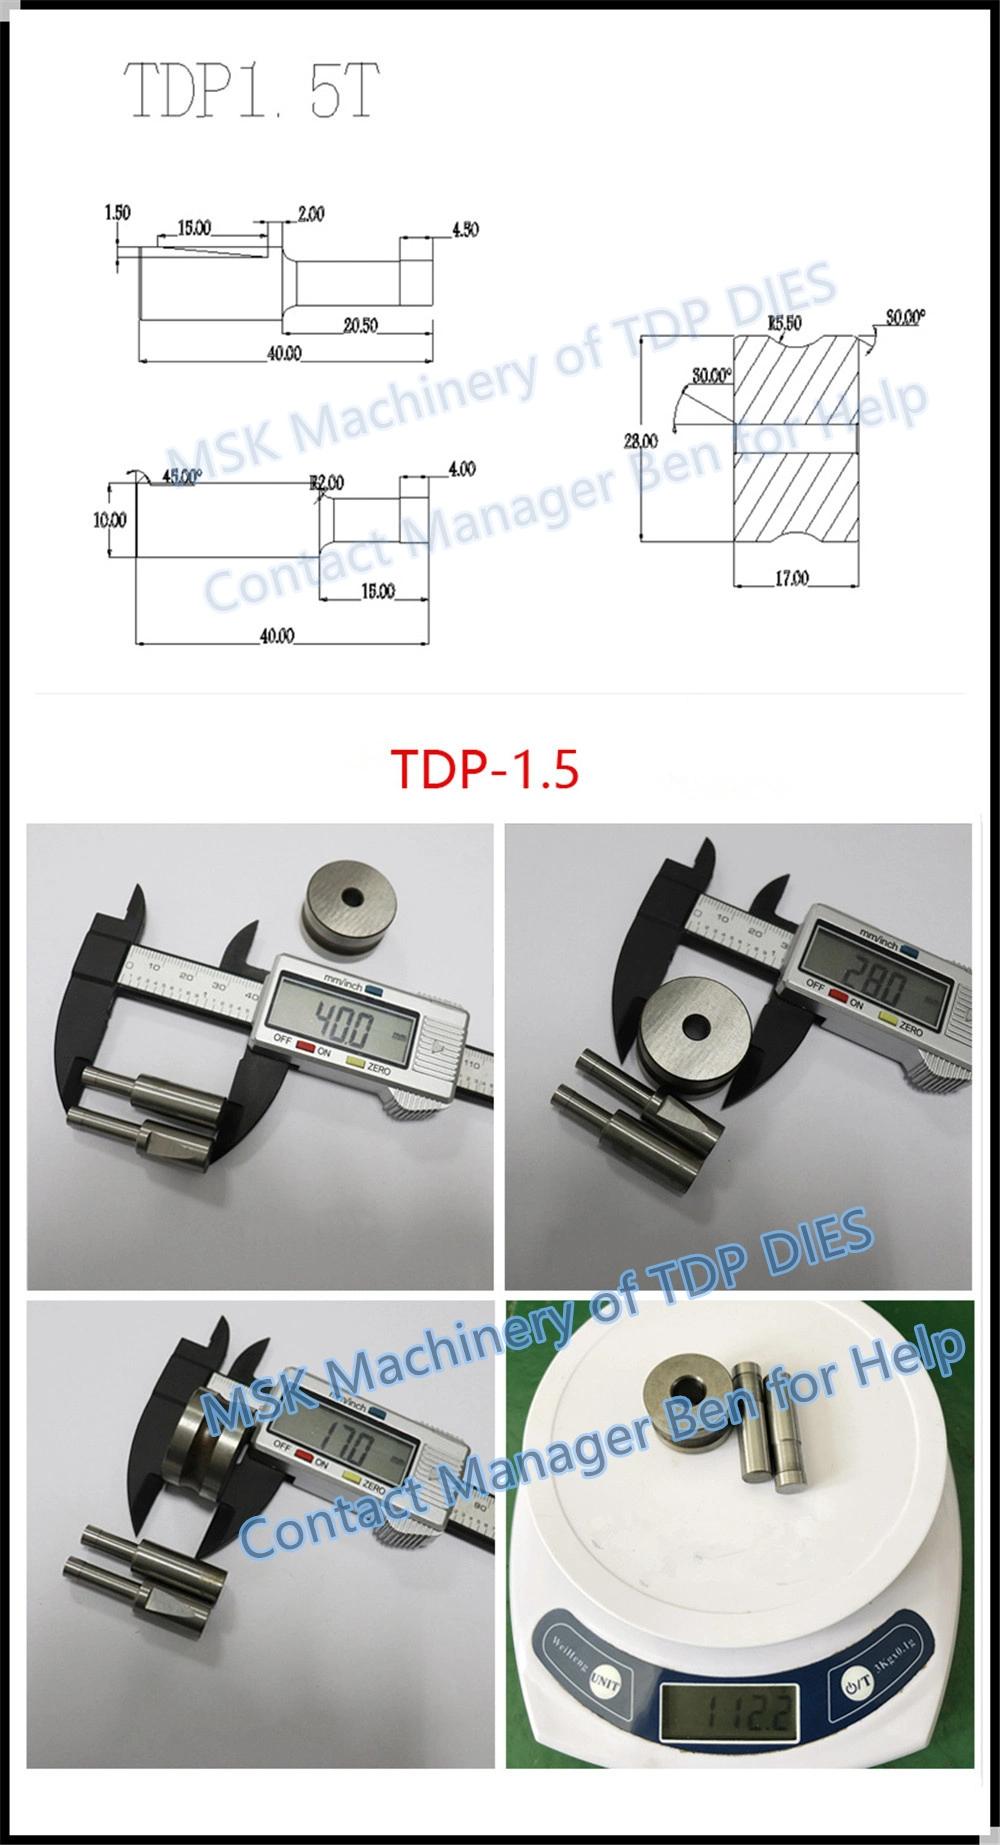 Msk Customized Tdp-0, Tdp1.5, Tdp5, Tdp6 Pill Press Mould Tablet Pill Press Punching Mould at Factory Price